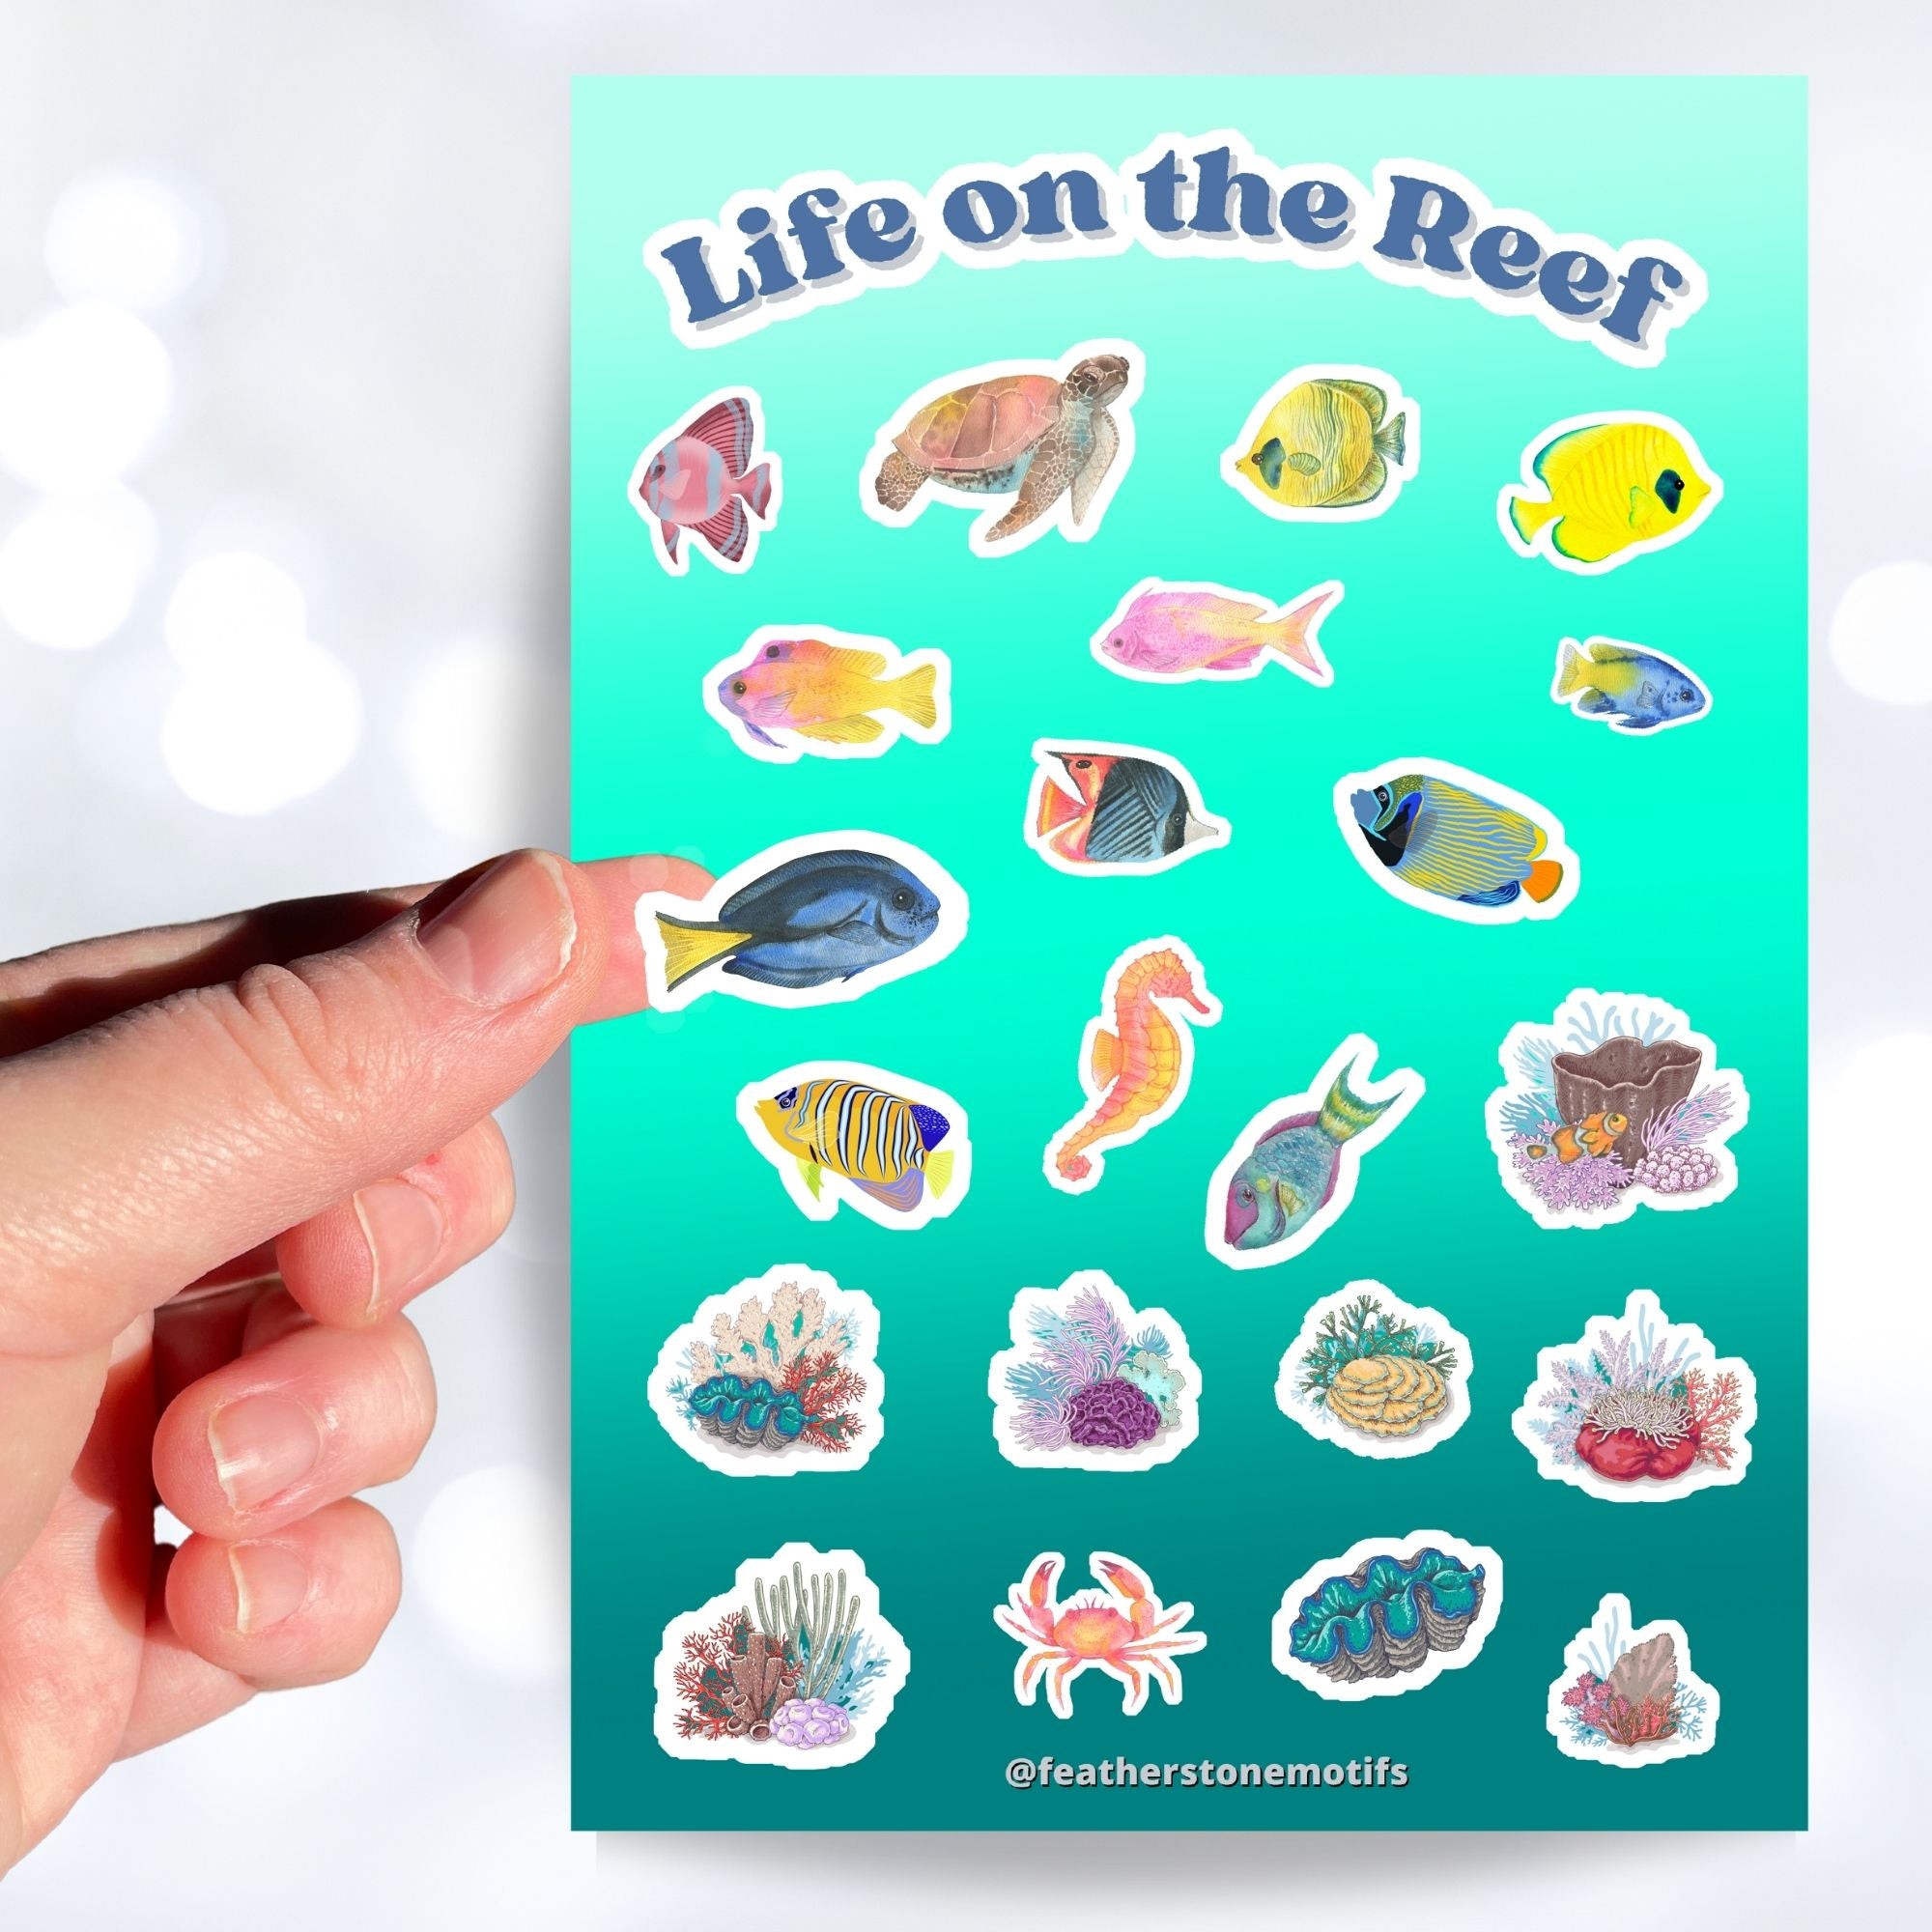 Teaming with sea life, this sticker sheet is filled with sticker images of fish, sea turtles, and coral! Take the reef with you anywhere with these beautiful stickers. This image shows a hand holding a sticker of a blue tang above the sticker sheet.